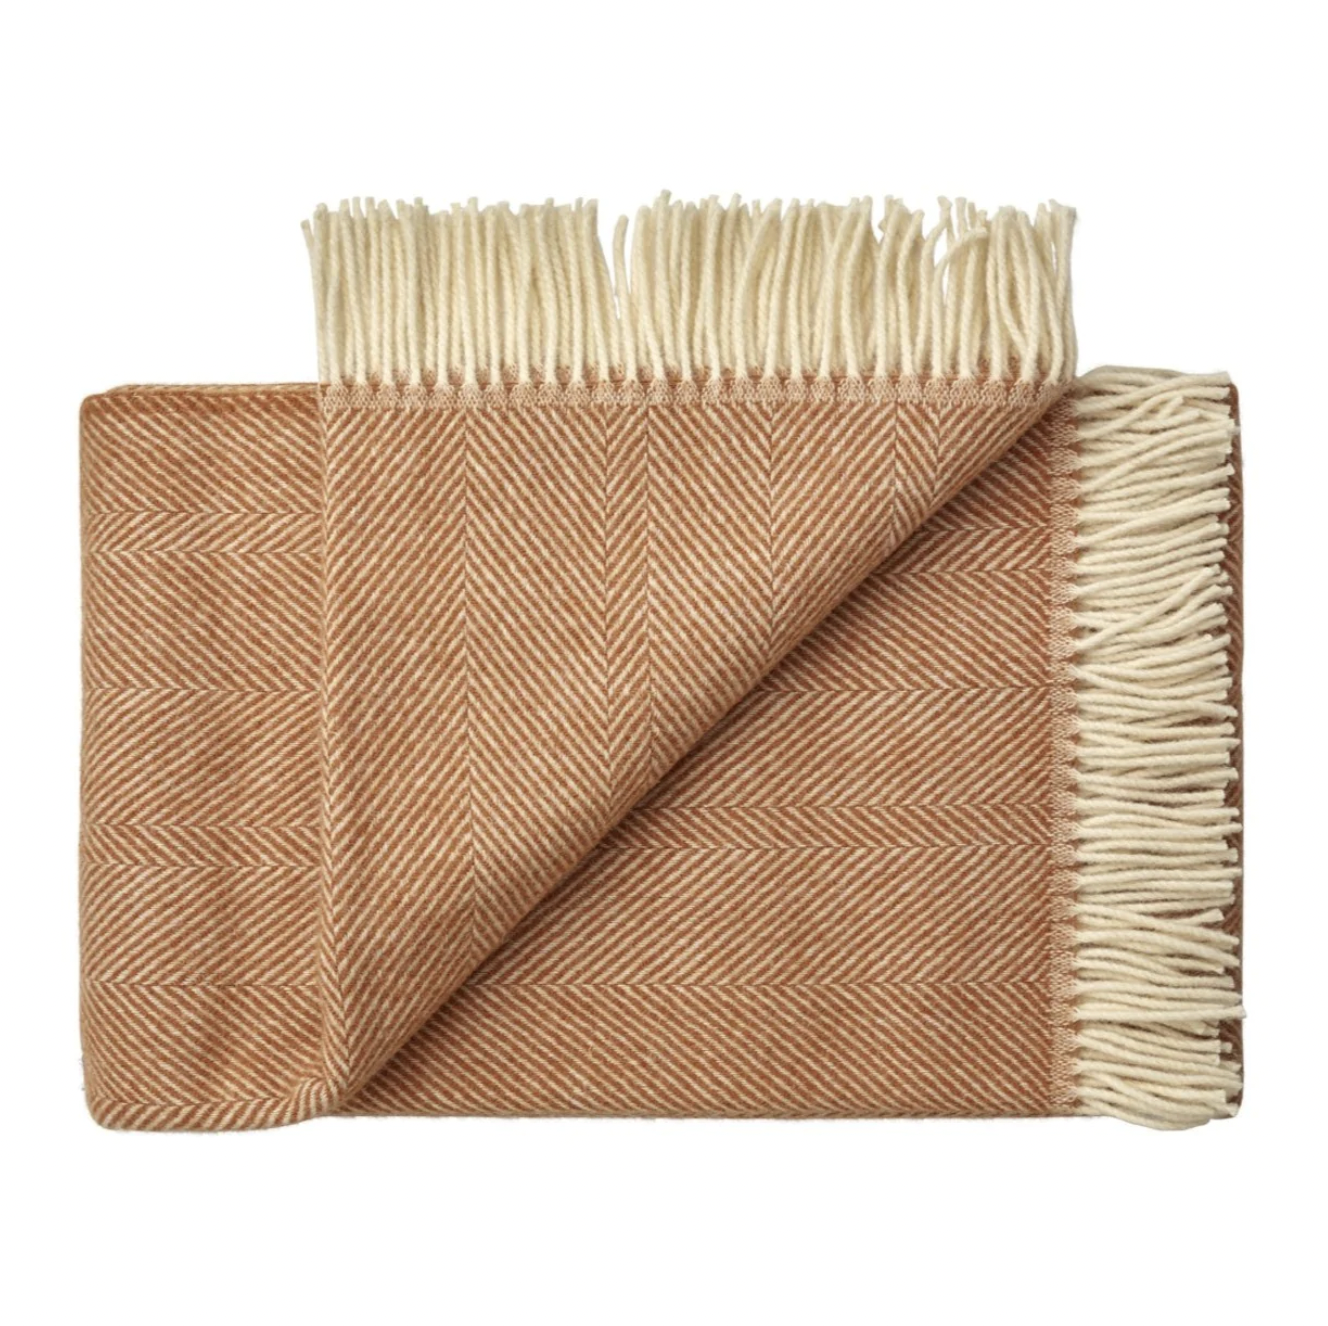 Weave Home Lindis Wool Throw, Apricot